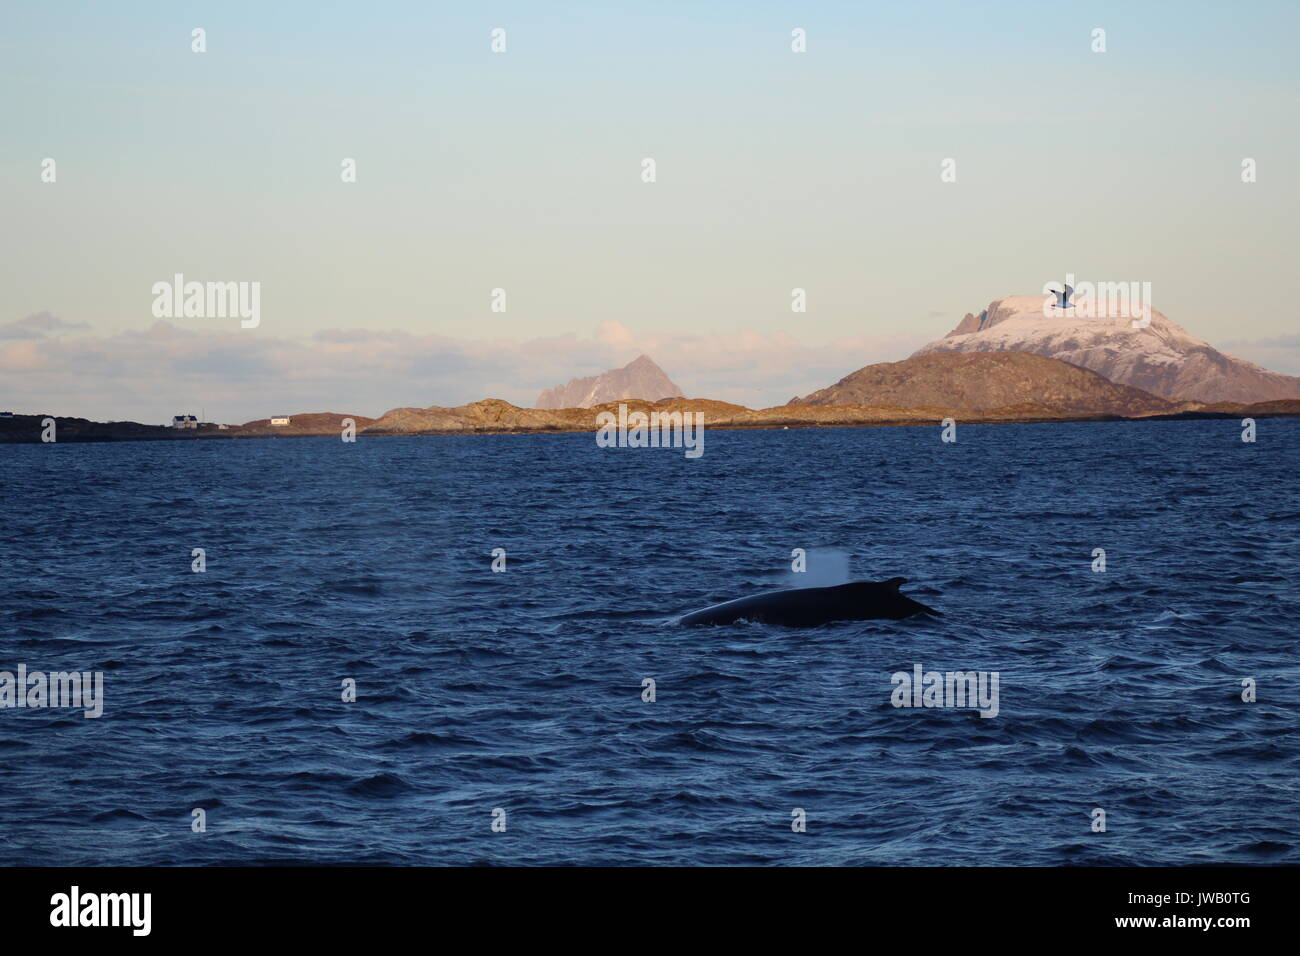 A humpback whale surfacing in a fjord by mountains with bird flying overhead Stock Photo